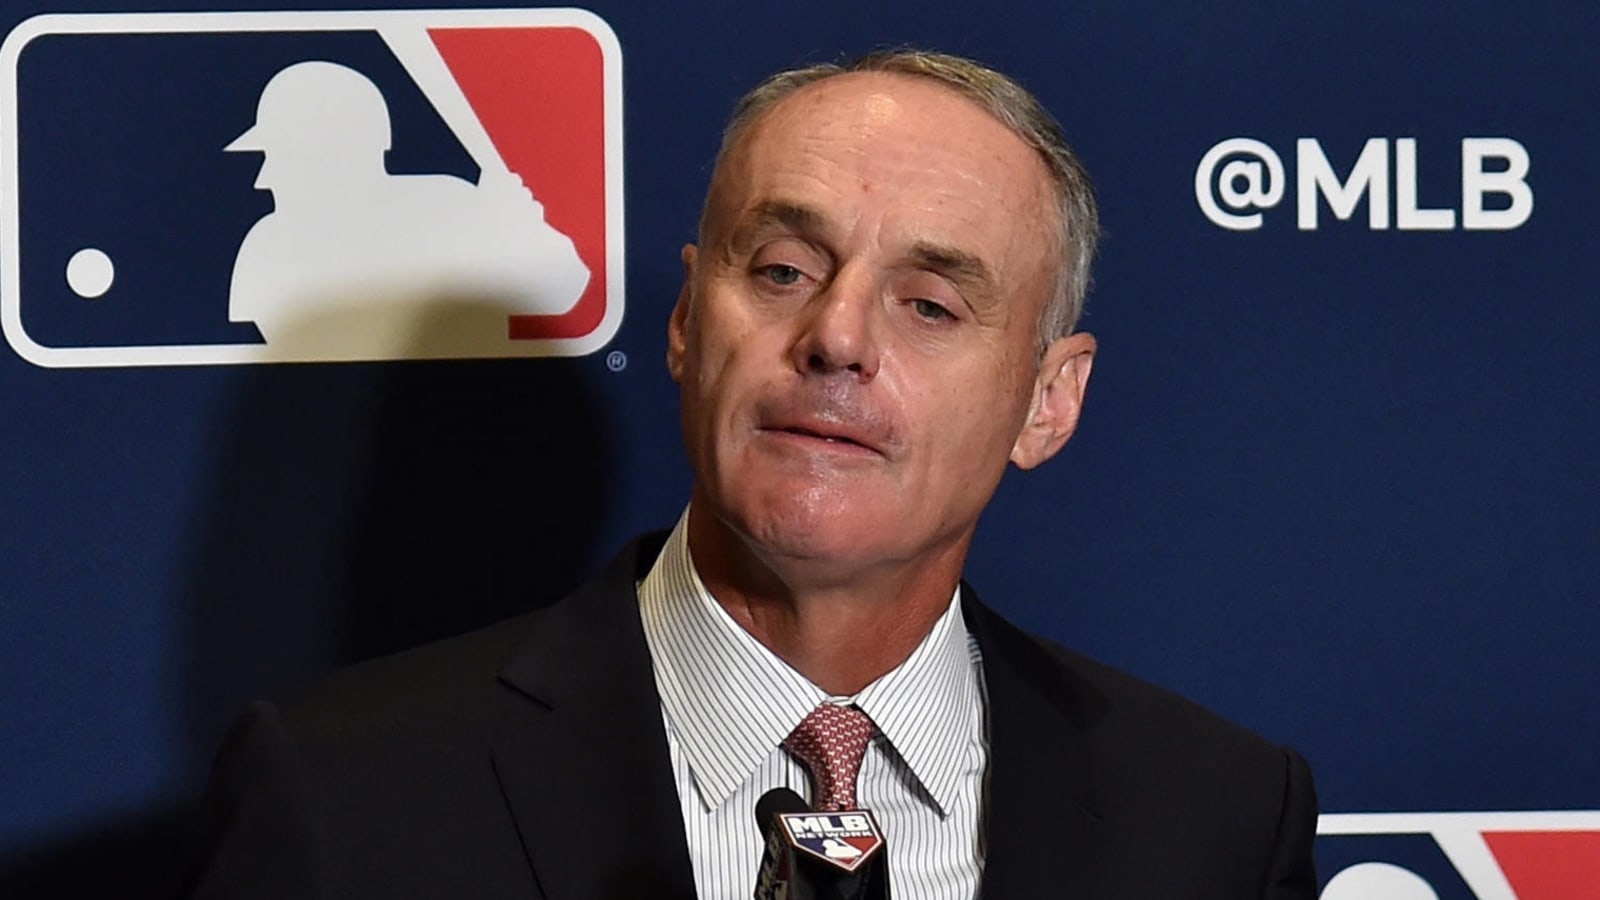 Rob Manfred said MLB could shut down due to coronavirus outbreaks?